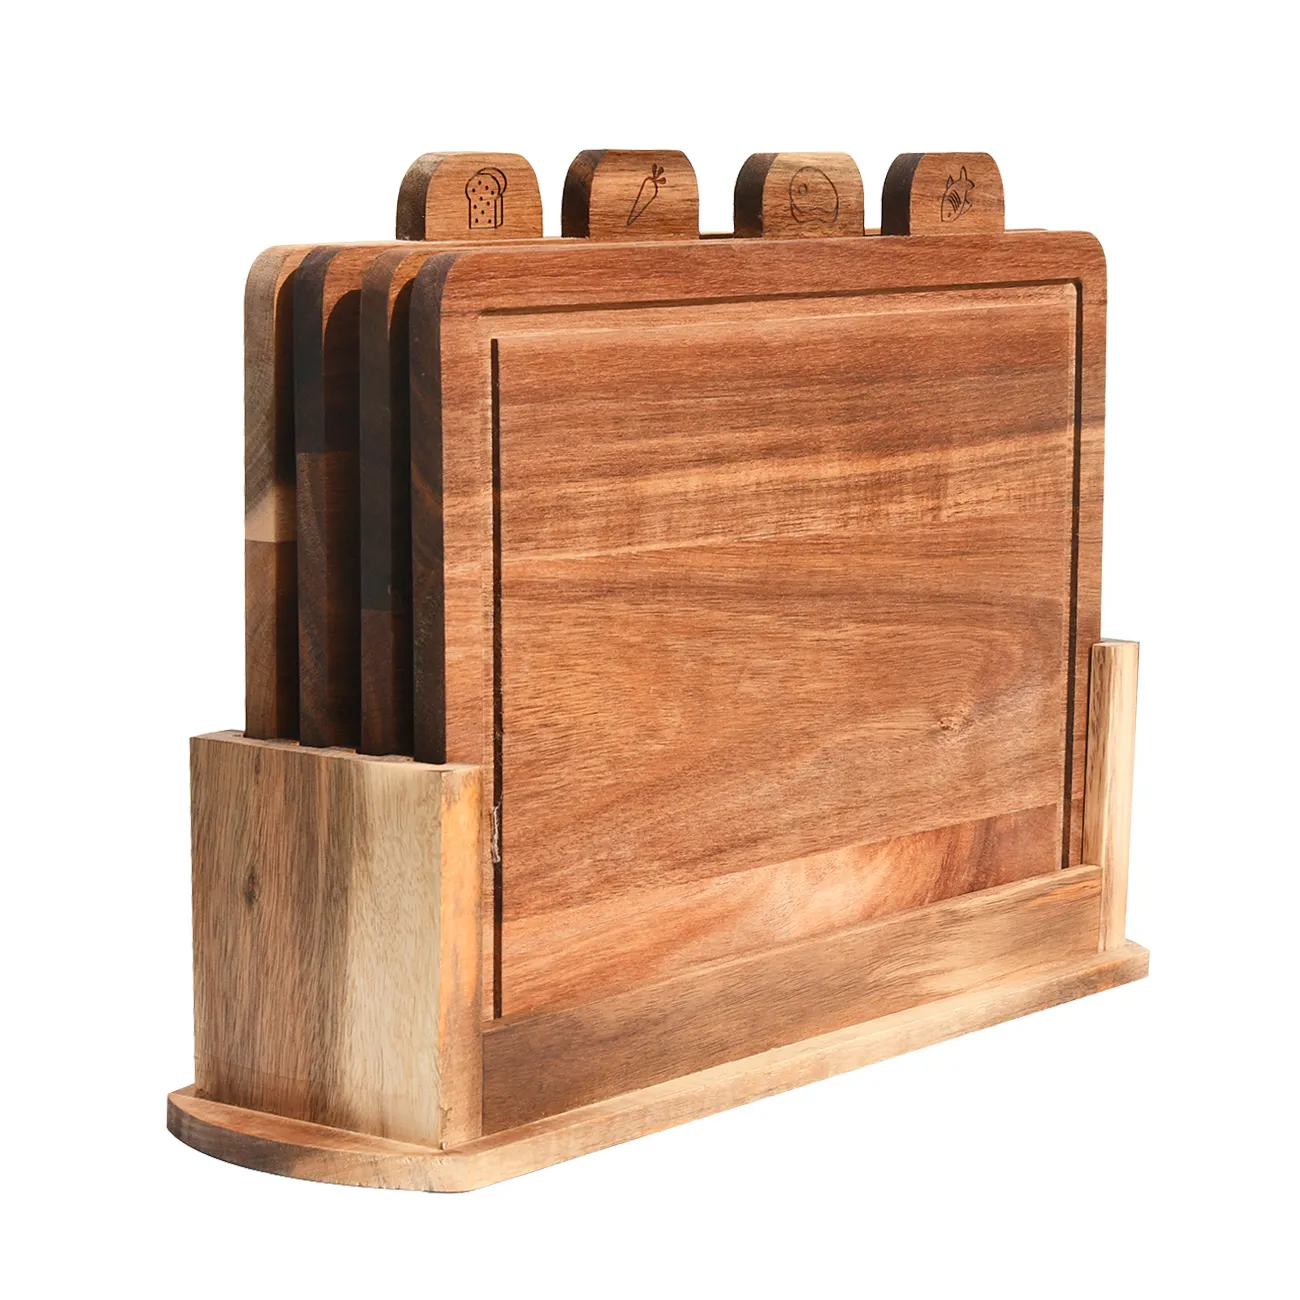 Sturdy Organic Acacia Wood Index Cutting Board Set With Storage Base Holder For Bread  Meat  Vegetables  Fish